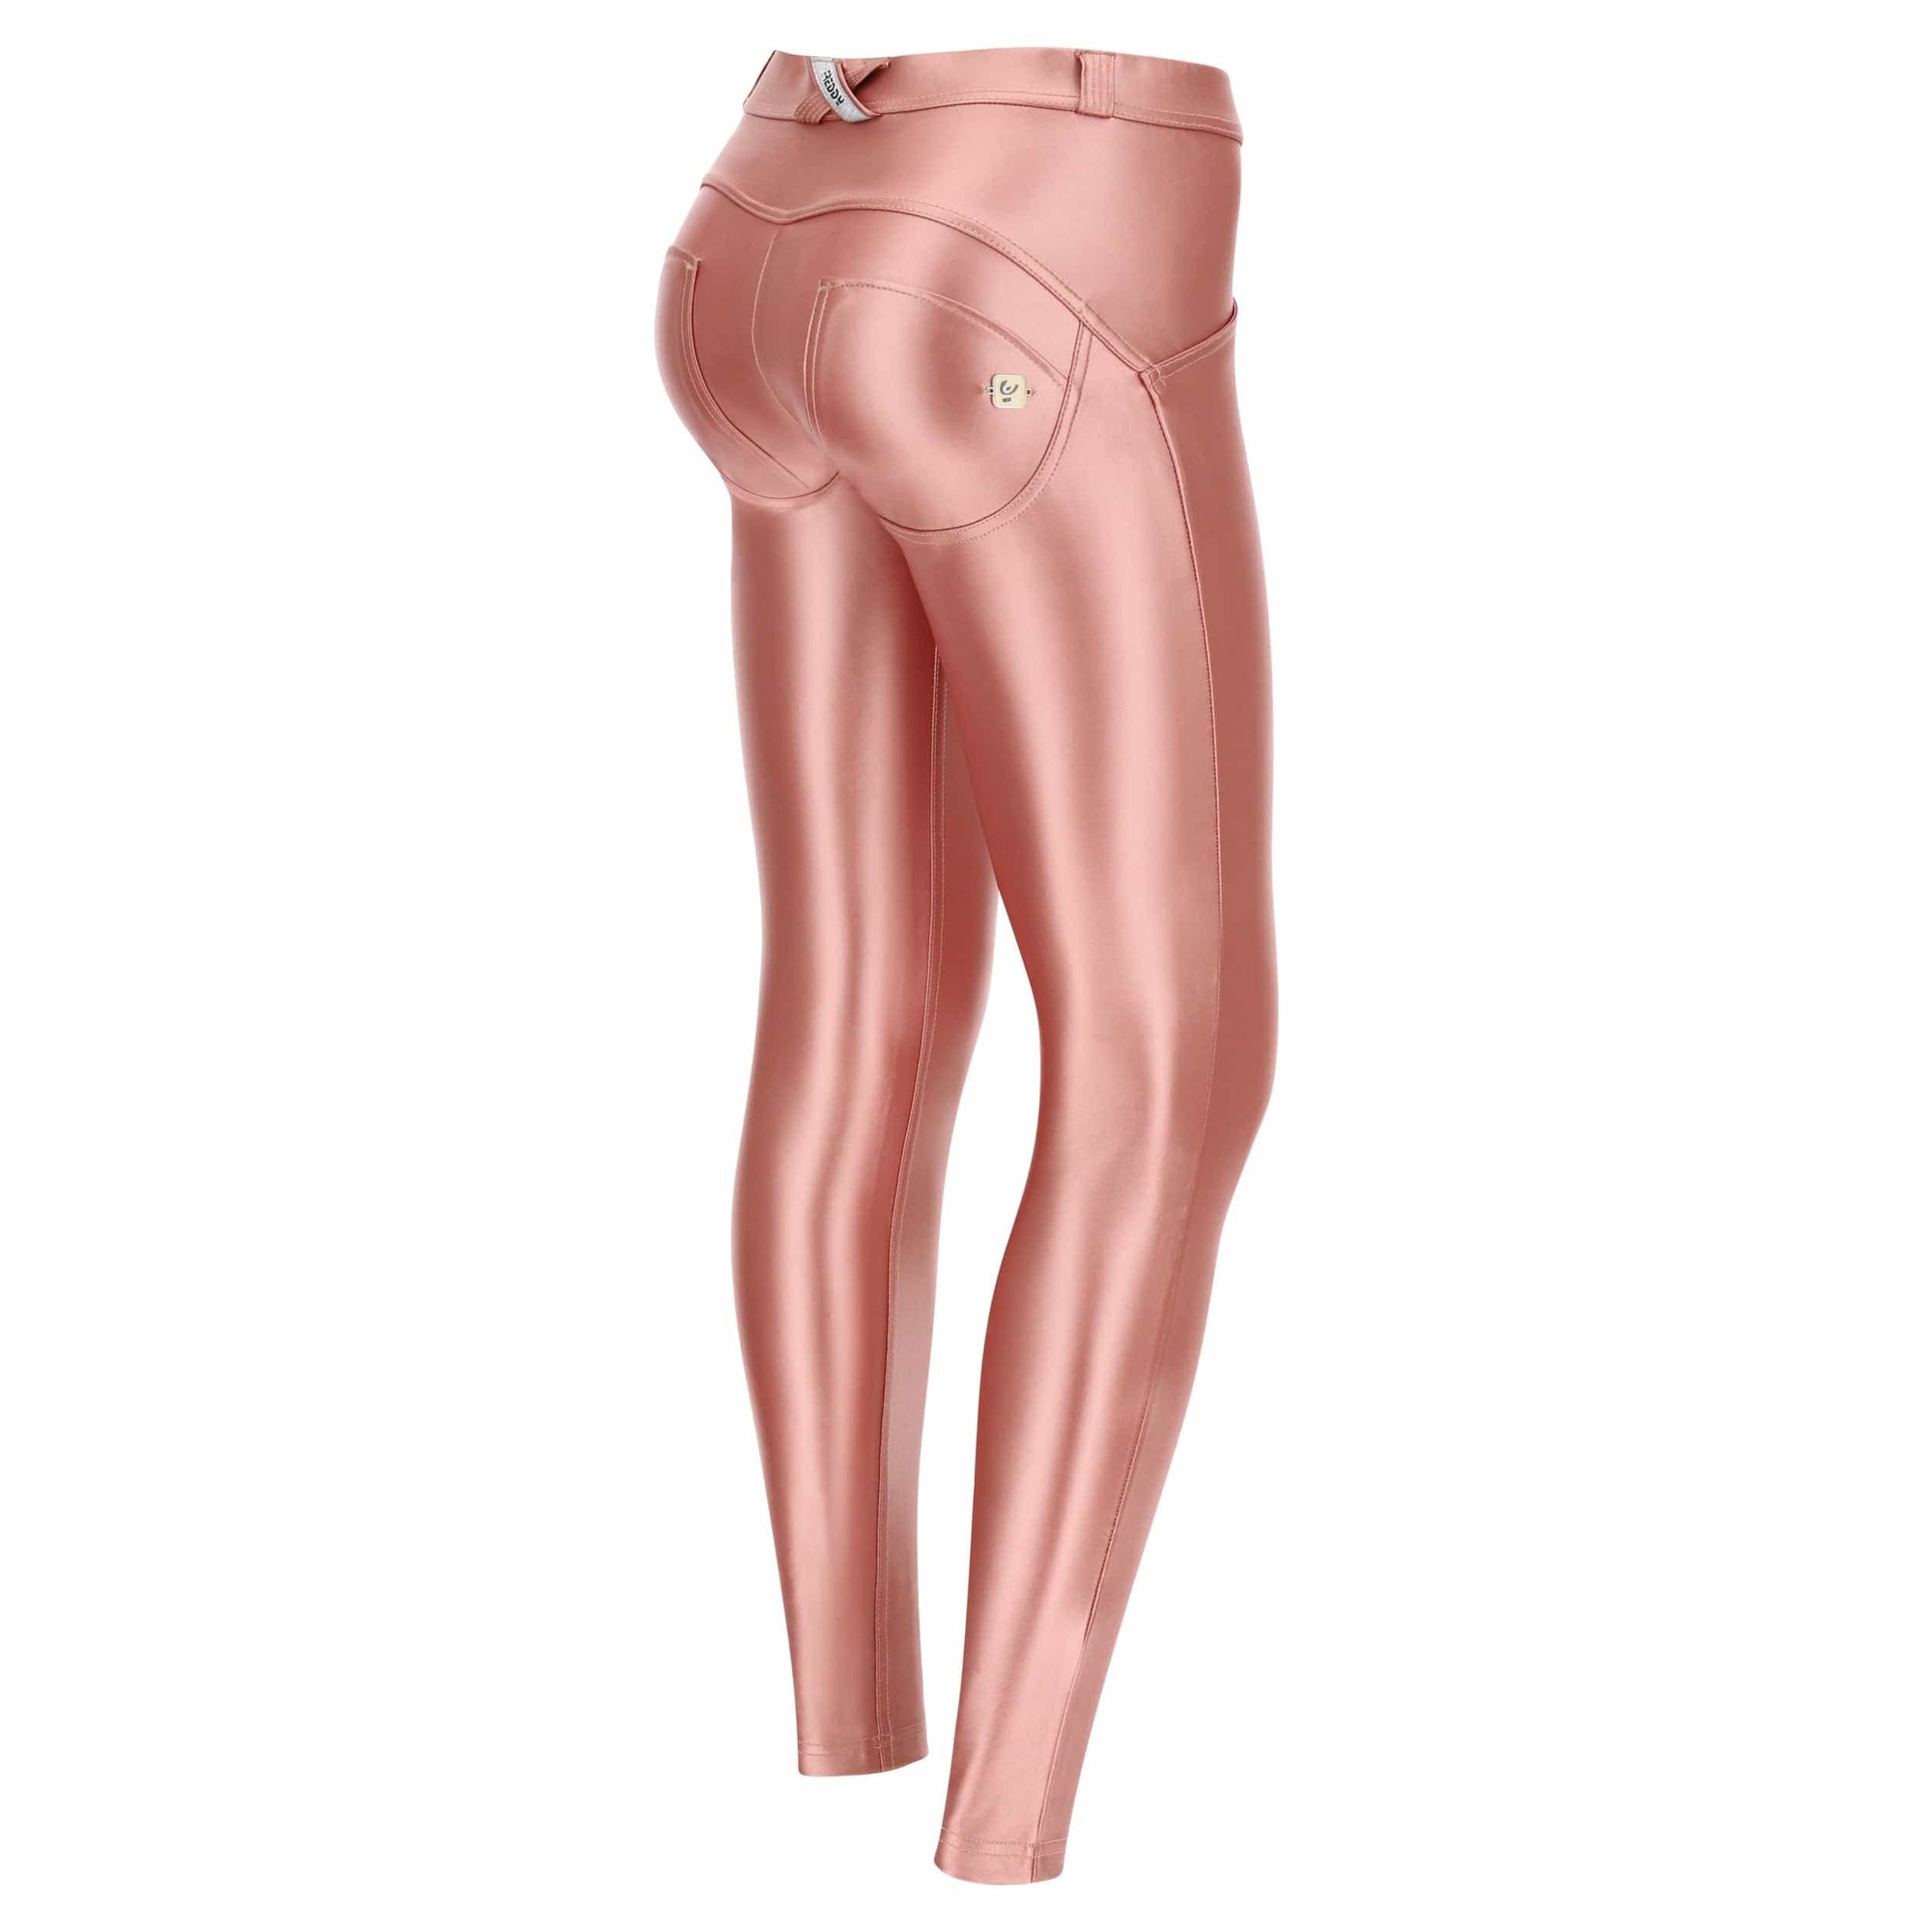 WR.UP Metallic Faux Leather - Mid Rise - Full Length - Pink 1